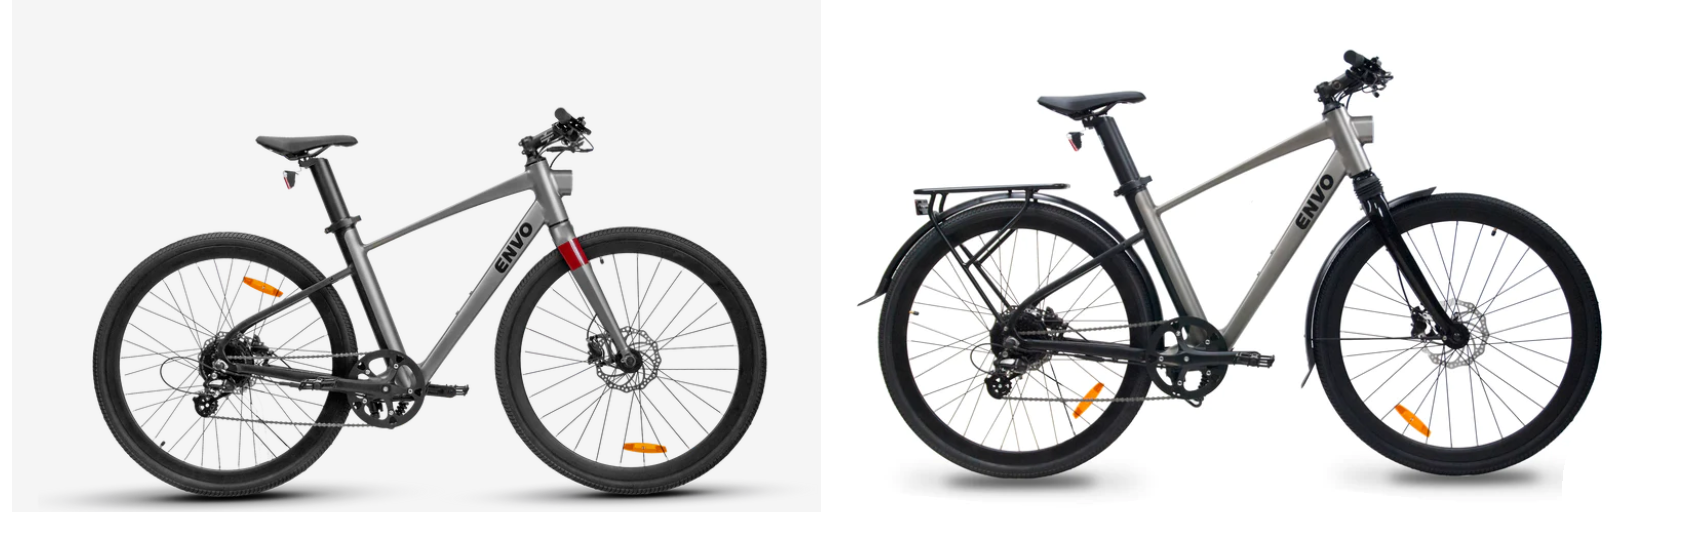 Stax vs Stax Pro: Which Electric Road Bike is Right for You?